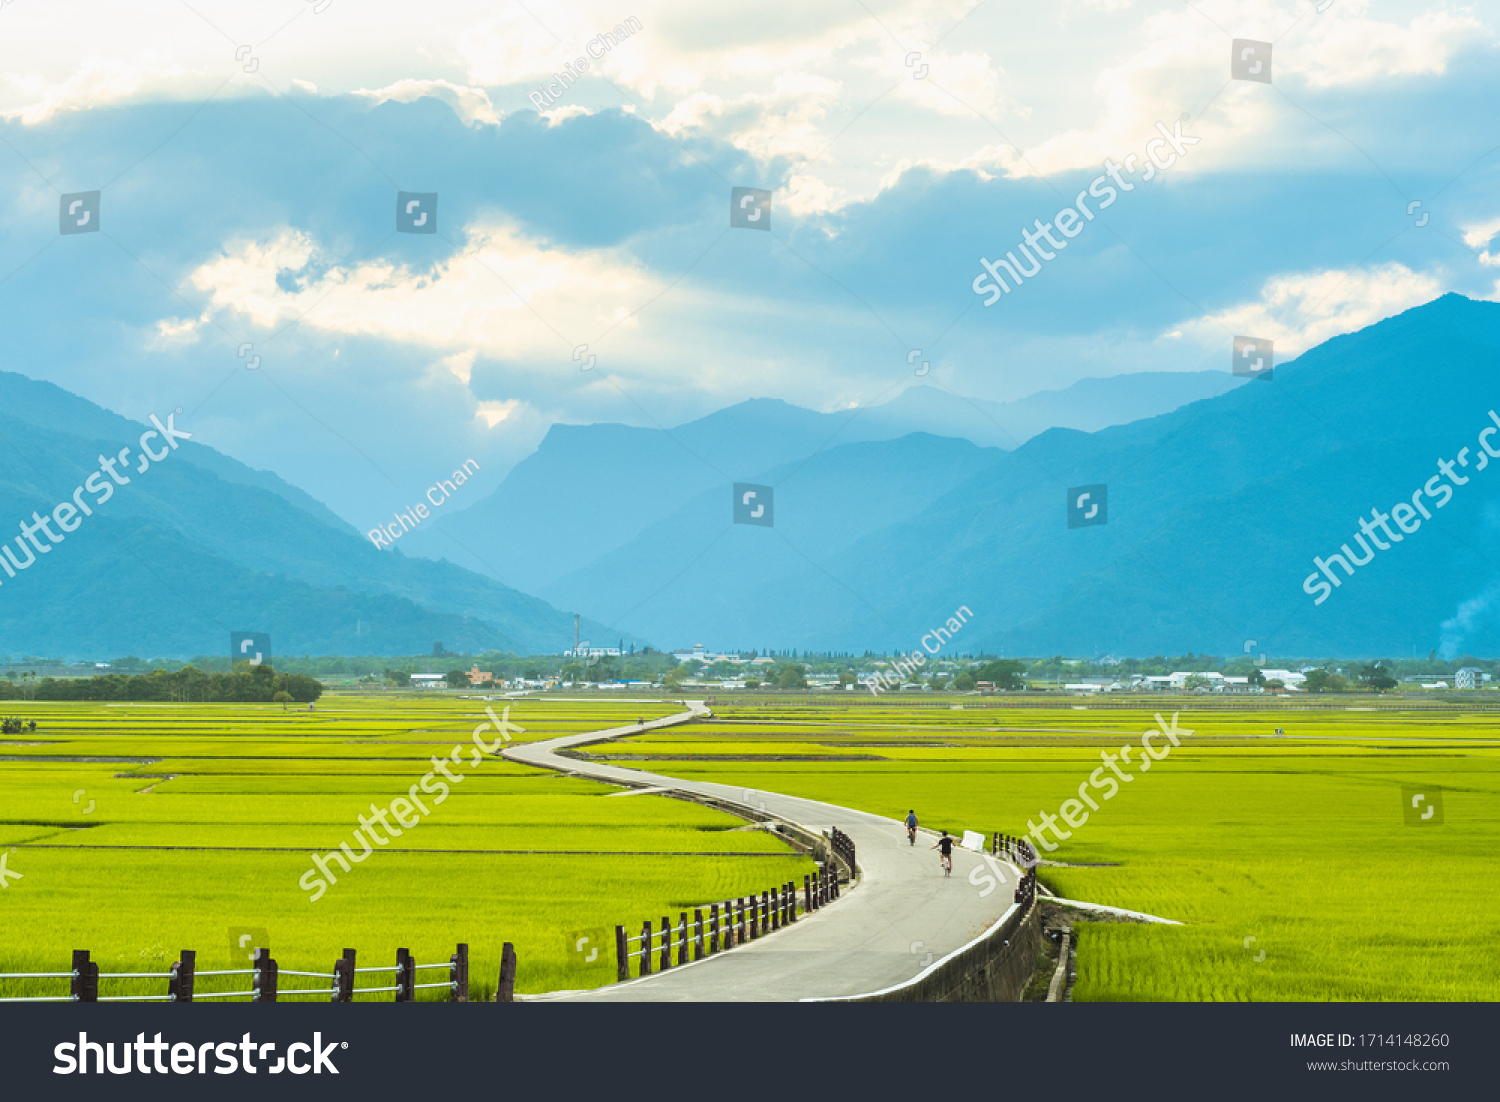 Heaven Road, Landscape of Chishang, Taitung #1714148260